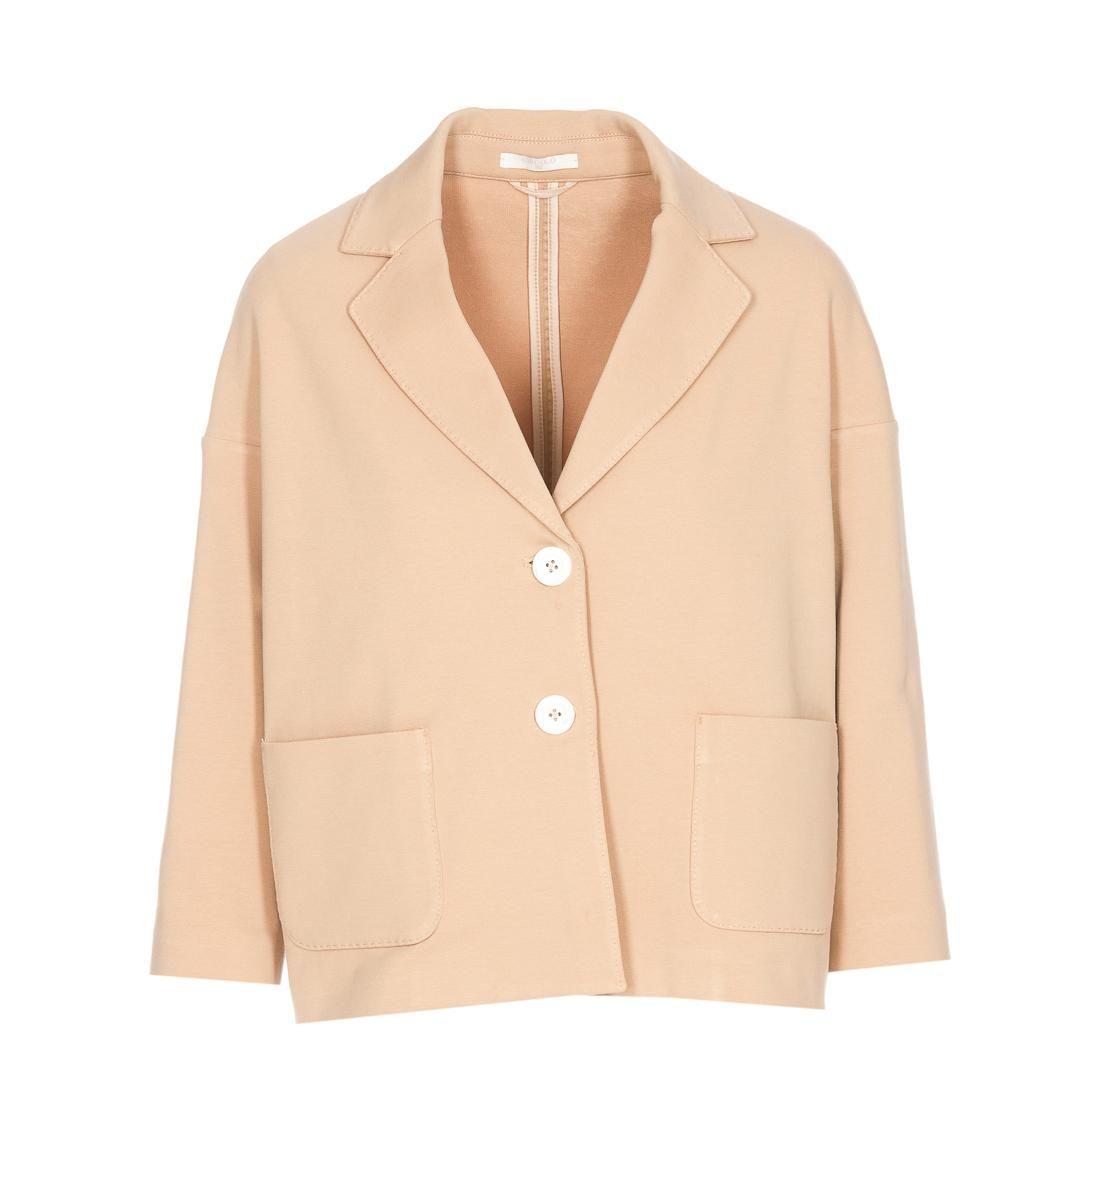 Circolo 1901 Jackets in Natural | Lyst